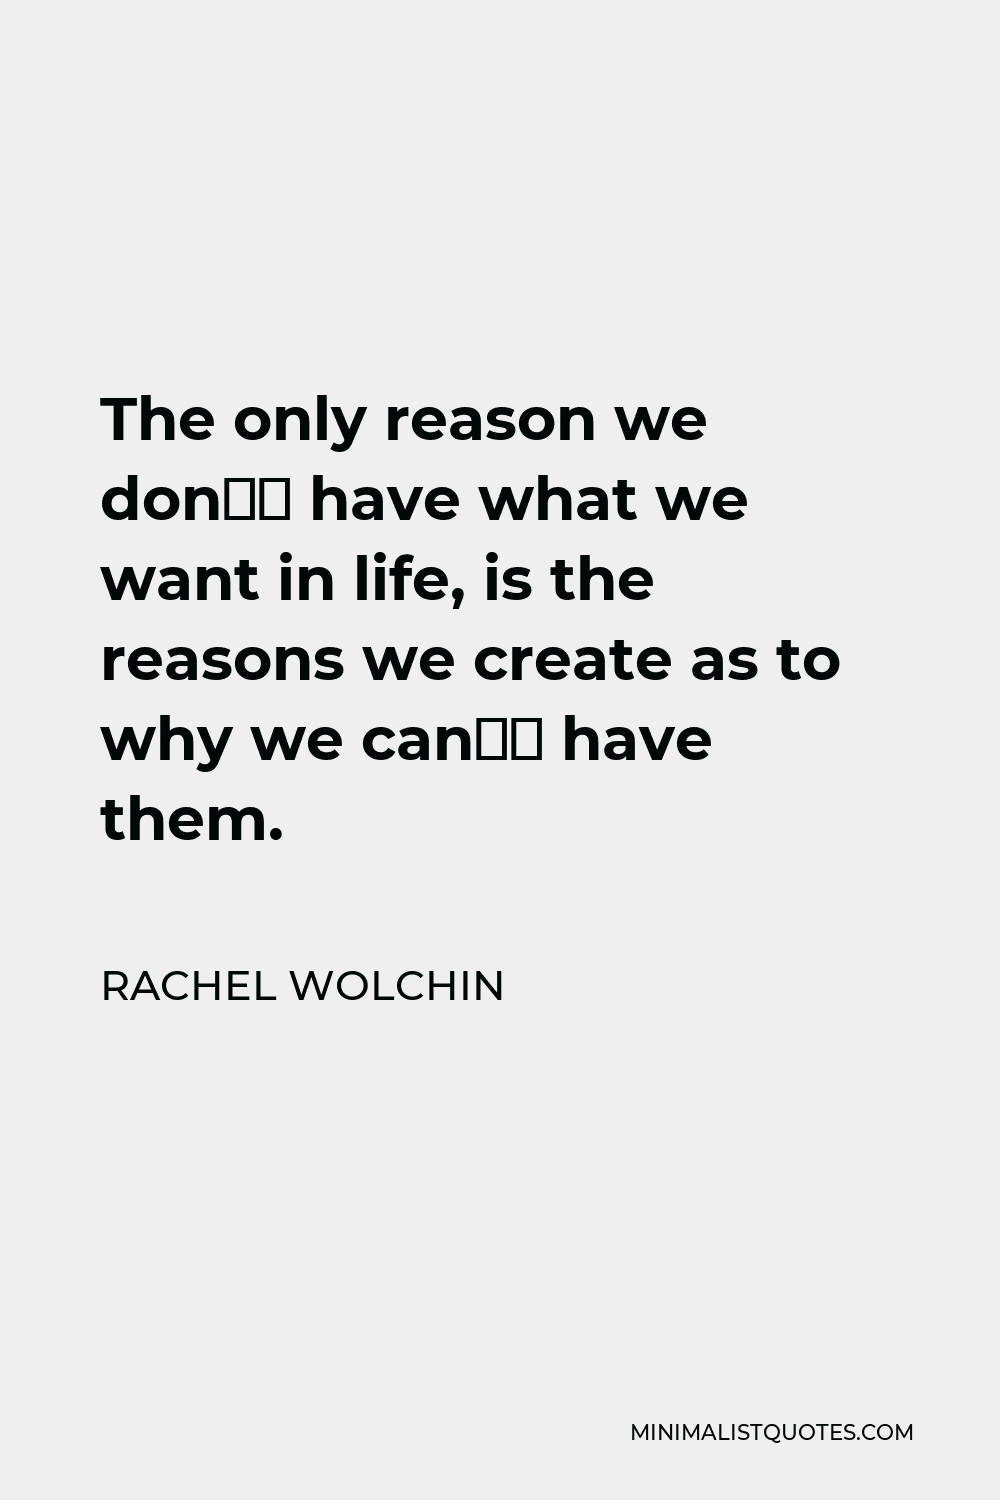 Rachel Wolchin Quote - The only reason we don’t have what we want in life, is the reasons we create as to why we can’t have them.